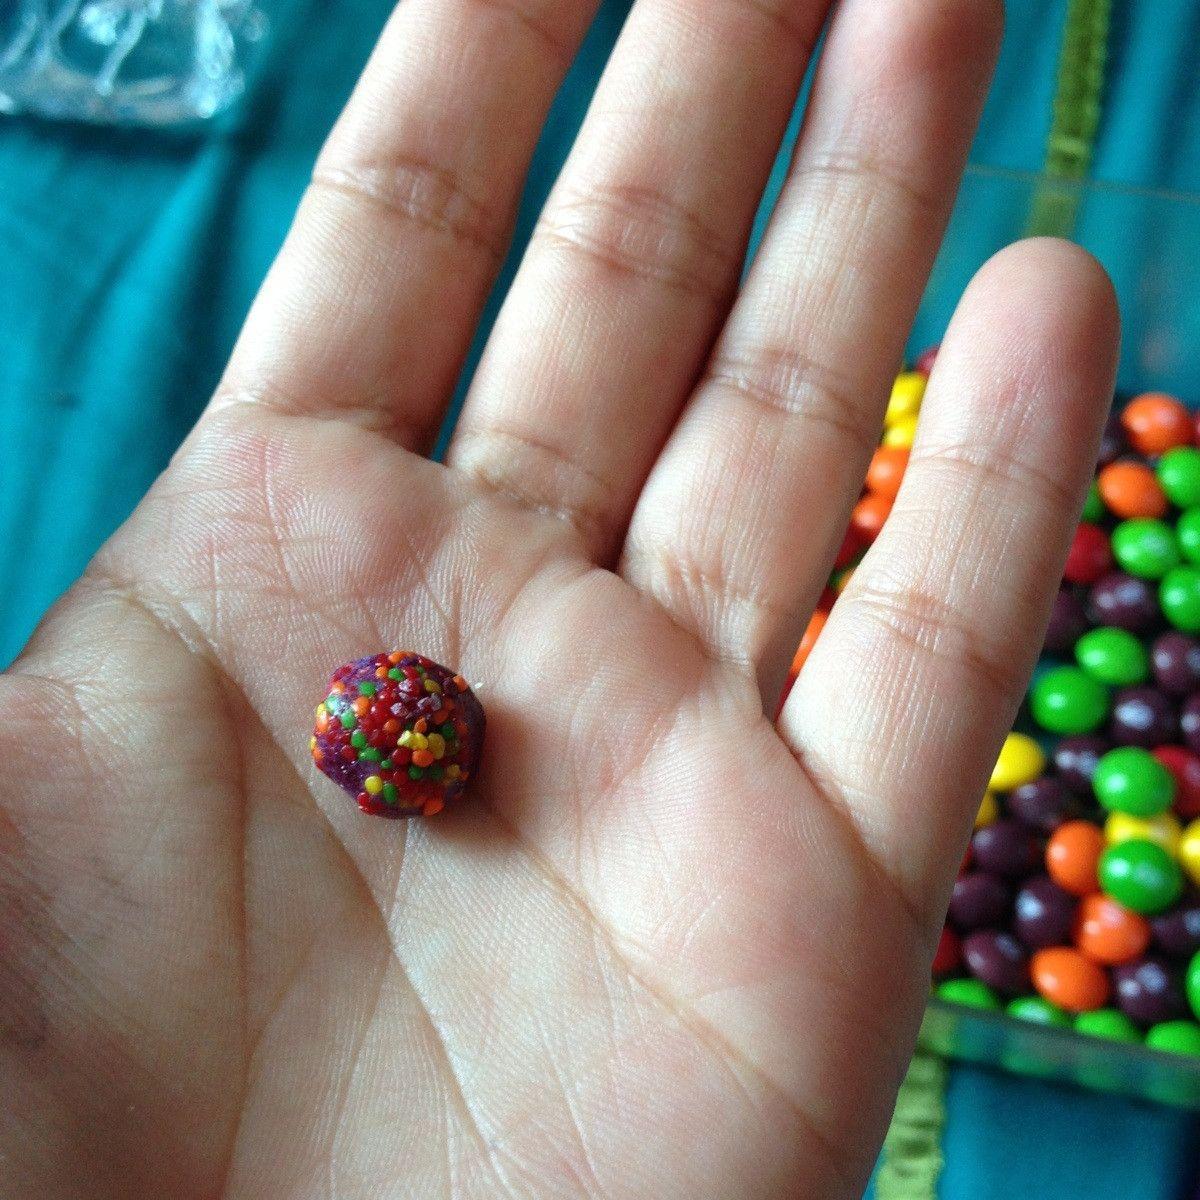 My GF found this in her skittles today